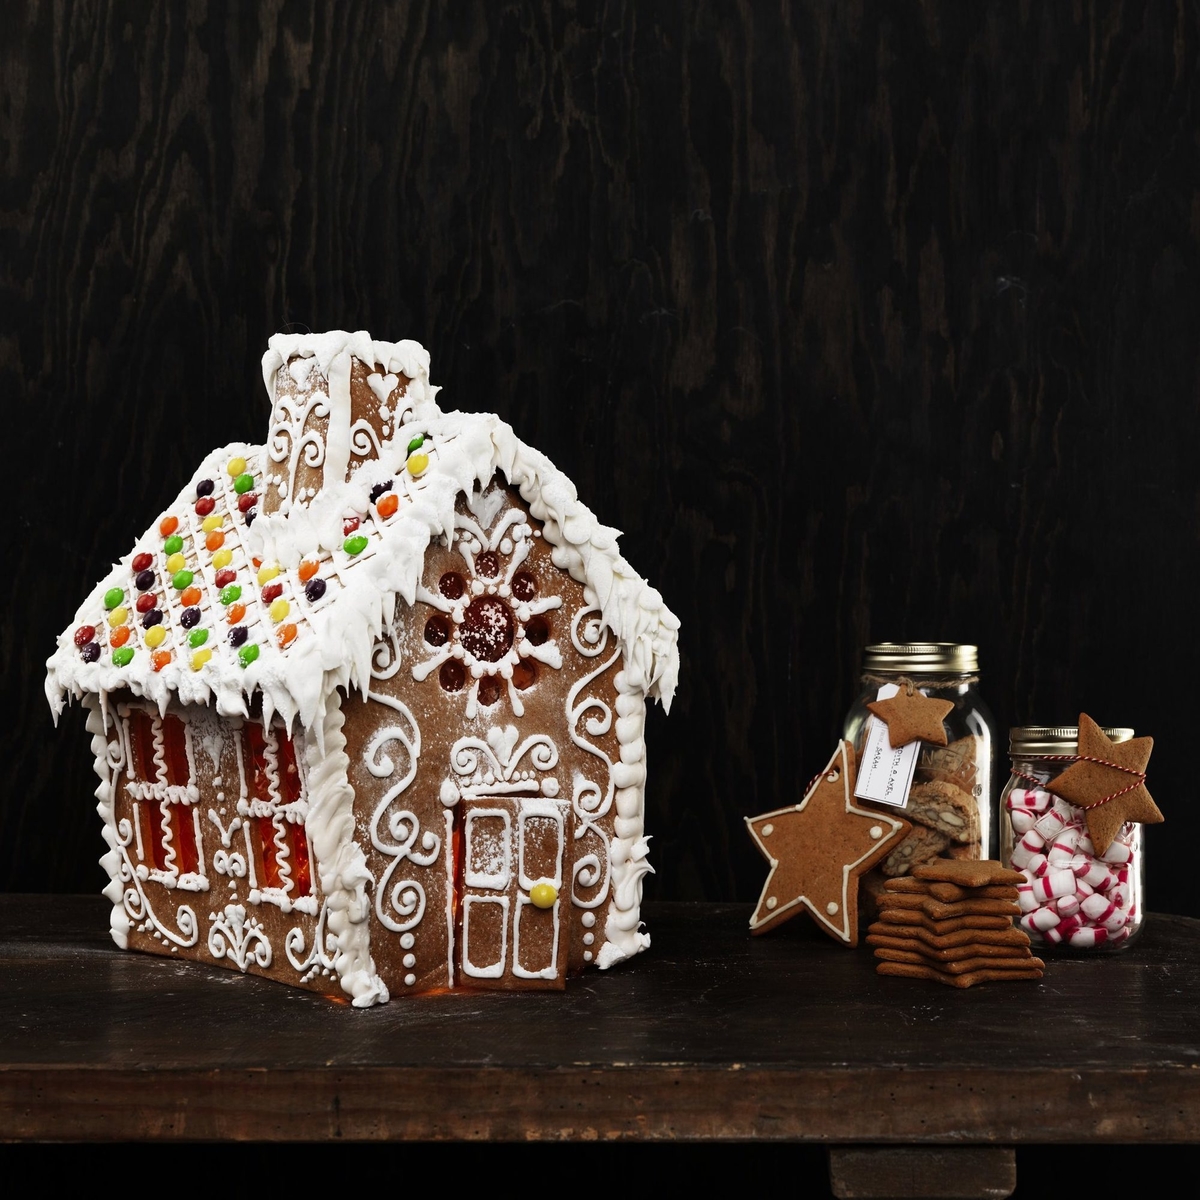 Build the most beautiful gingerbread house of Christmas!